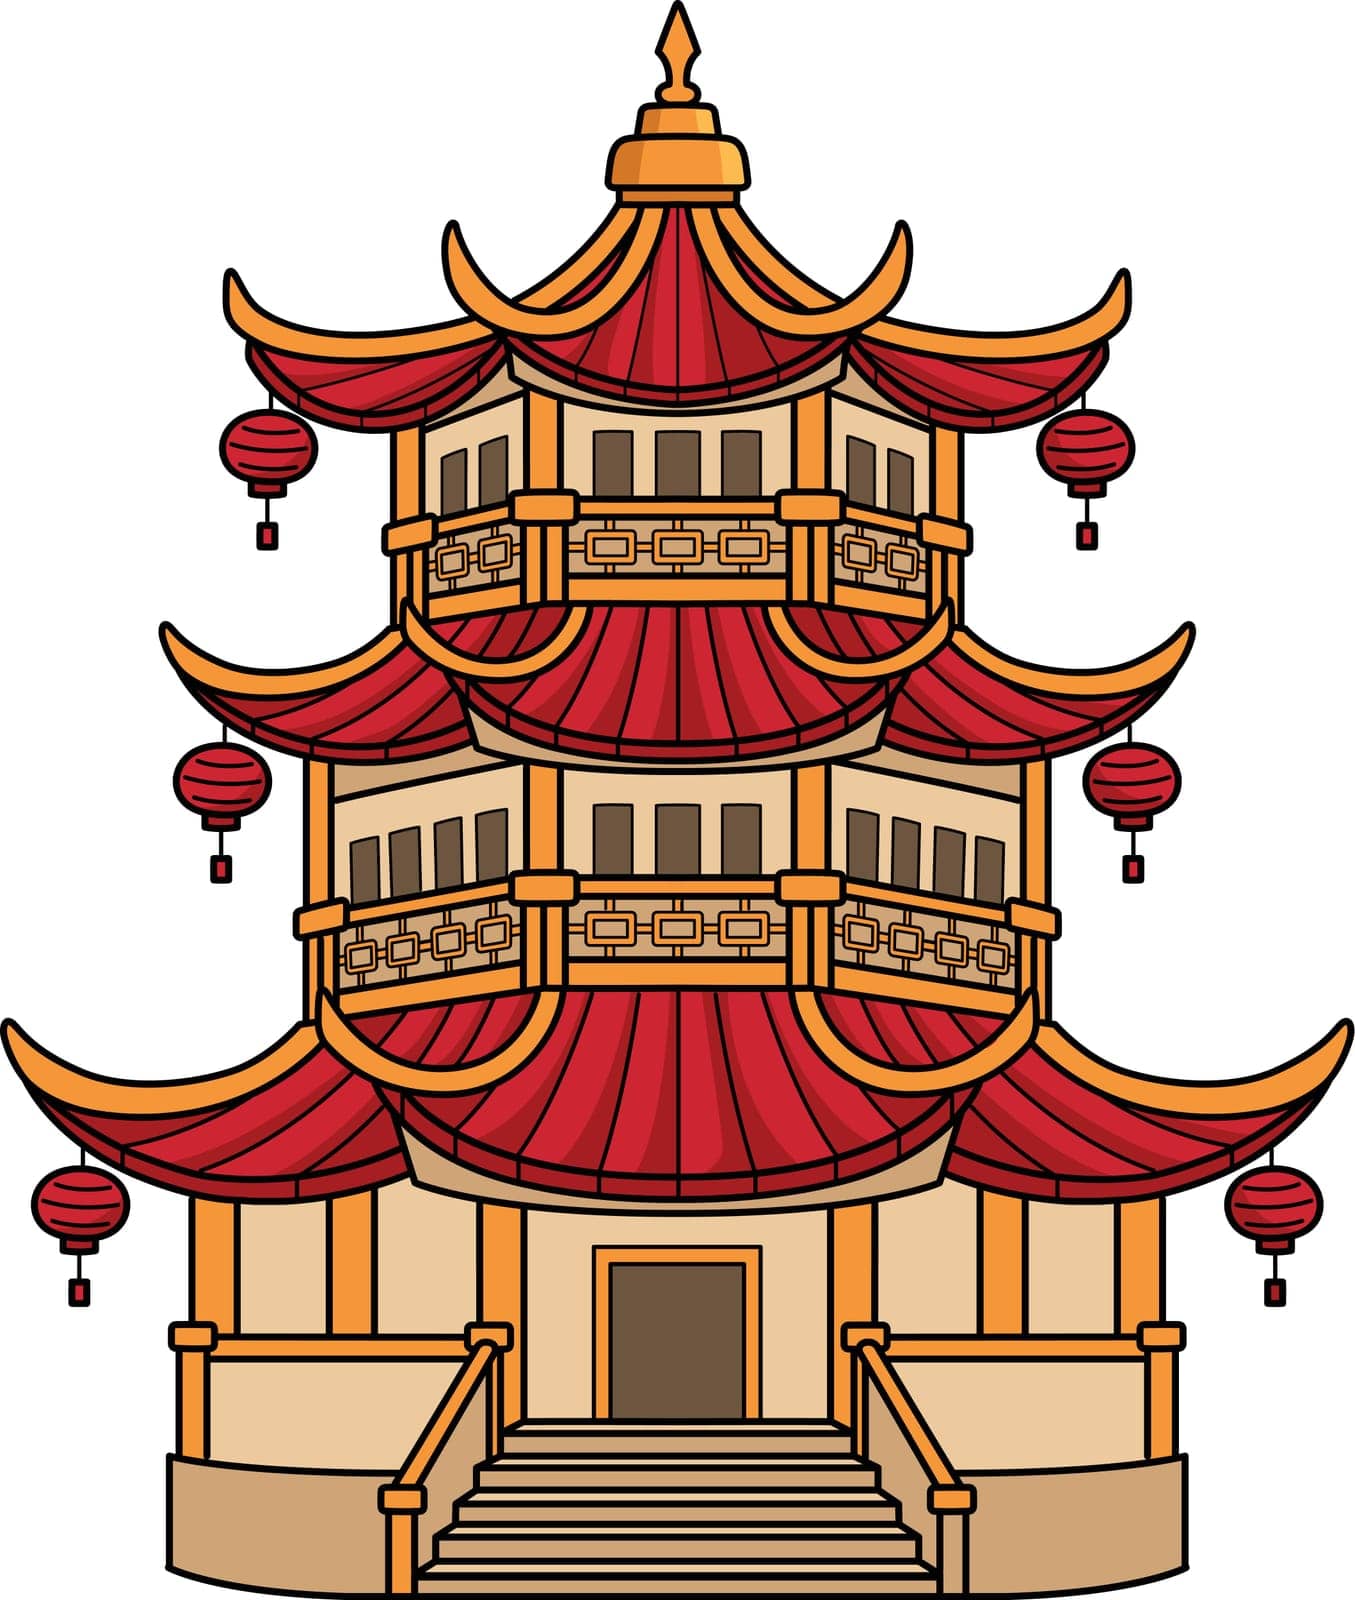 Pagoda Cartoon Colored Clipart Illustration by abbydesign